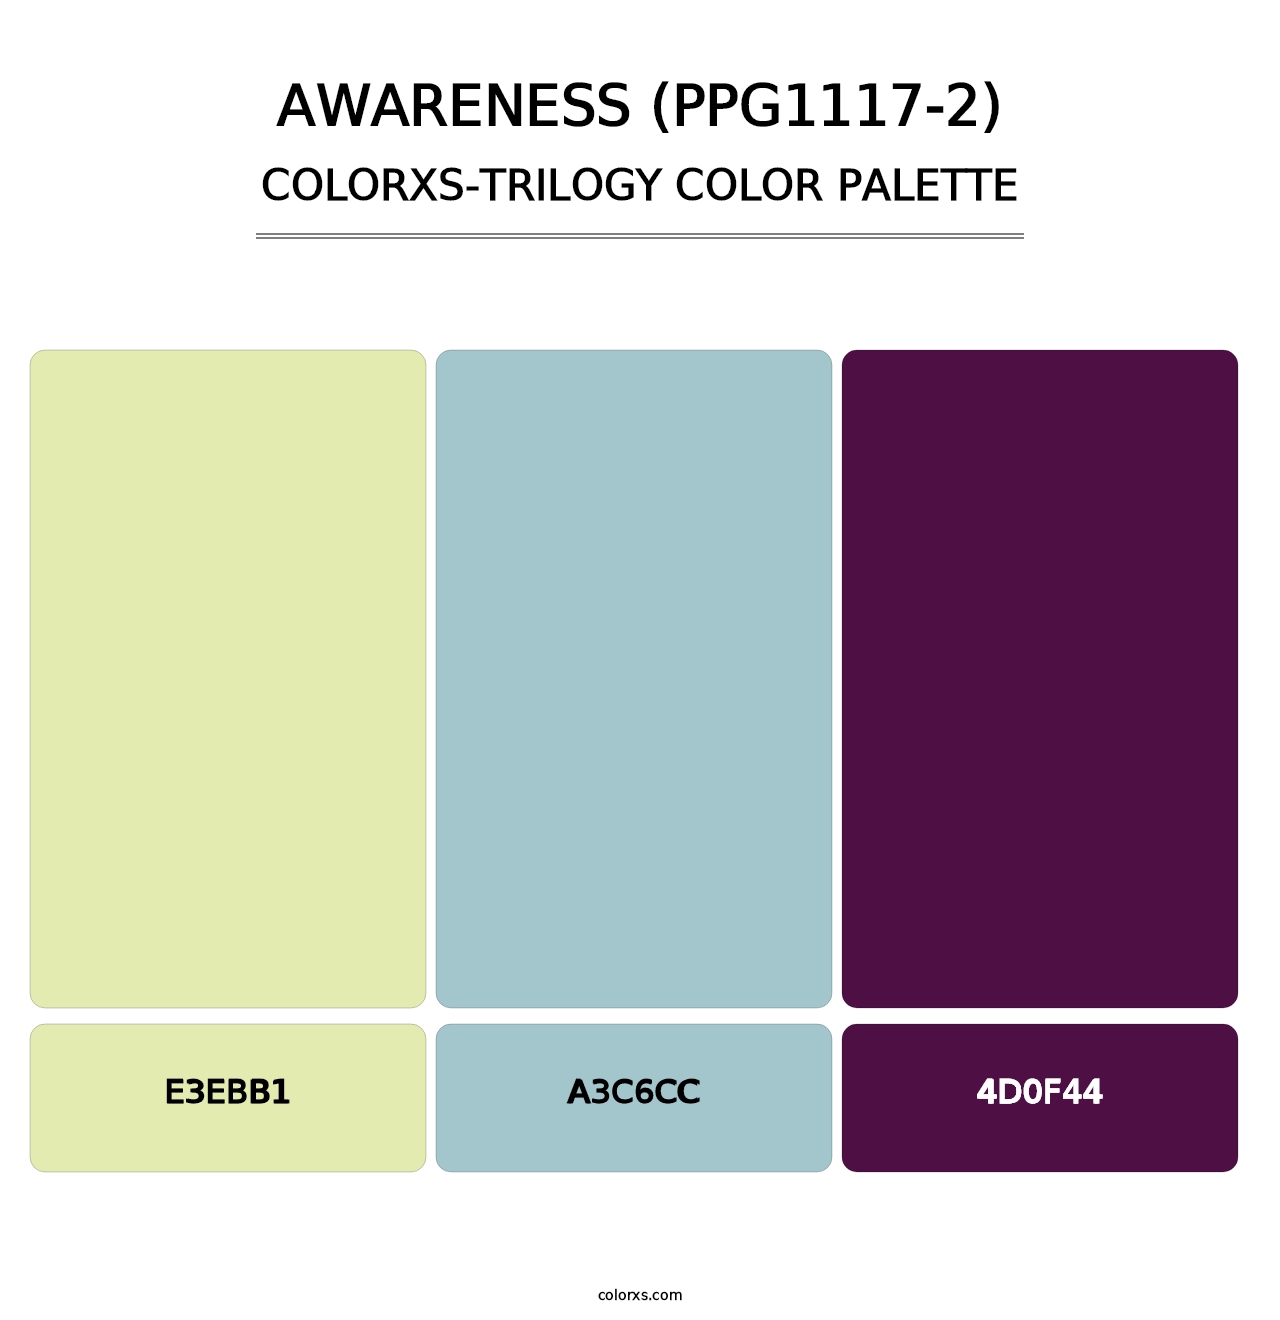 Awareness (PPG1117-2) - Colorxs Trilogy Palette